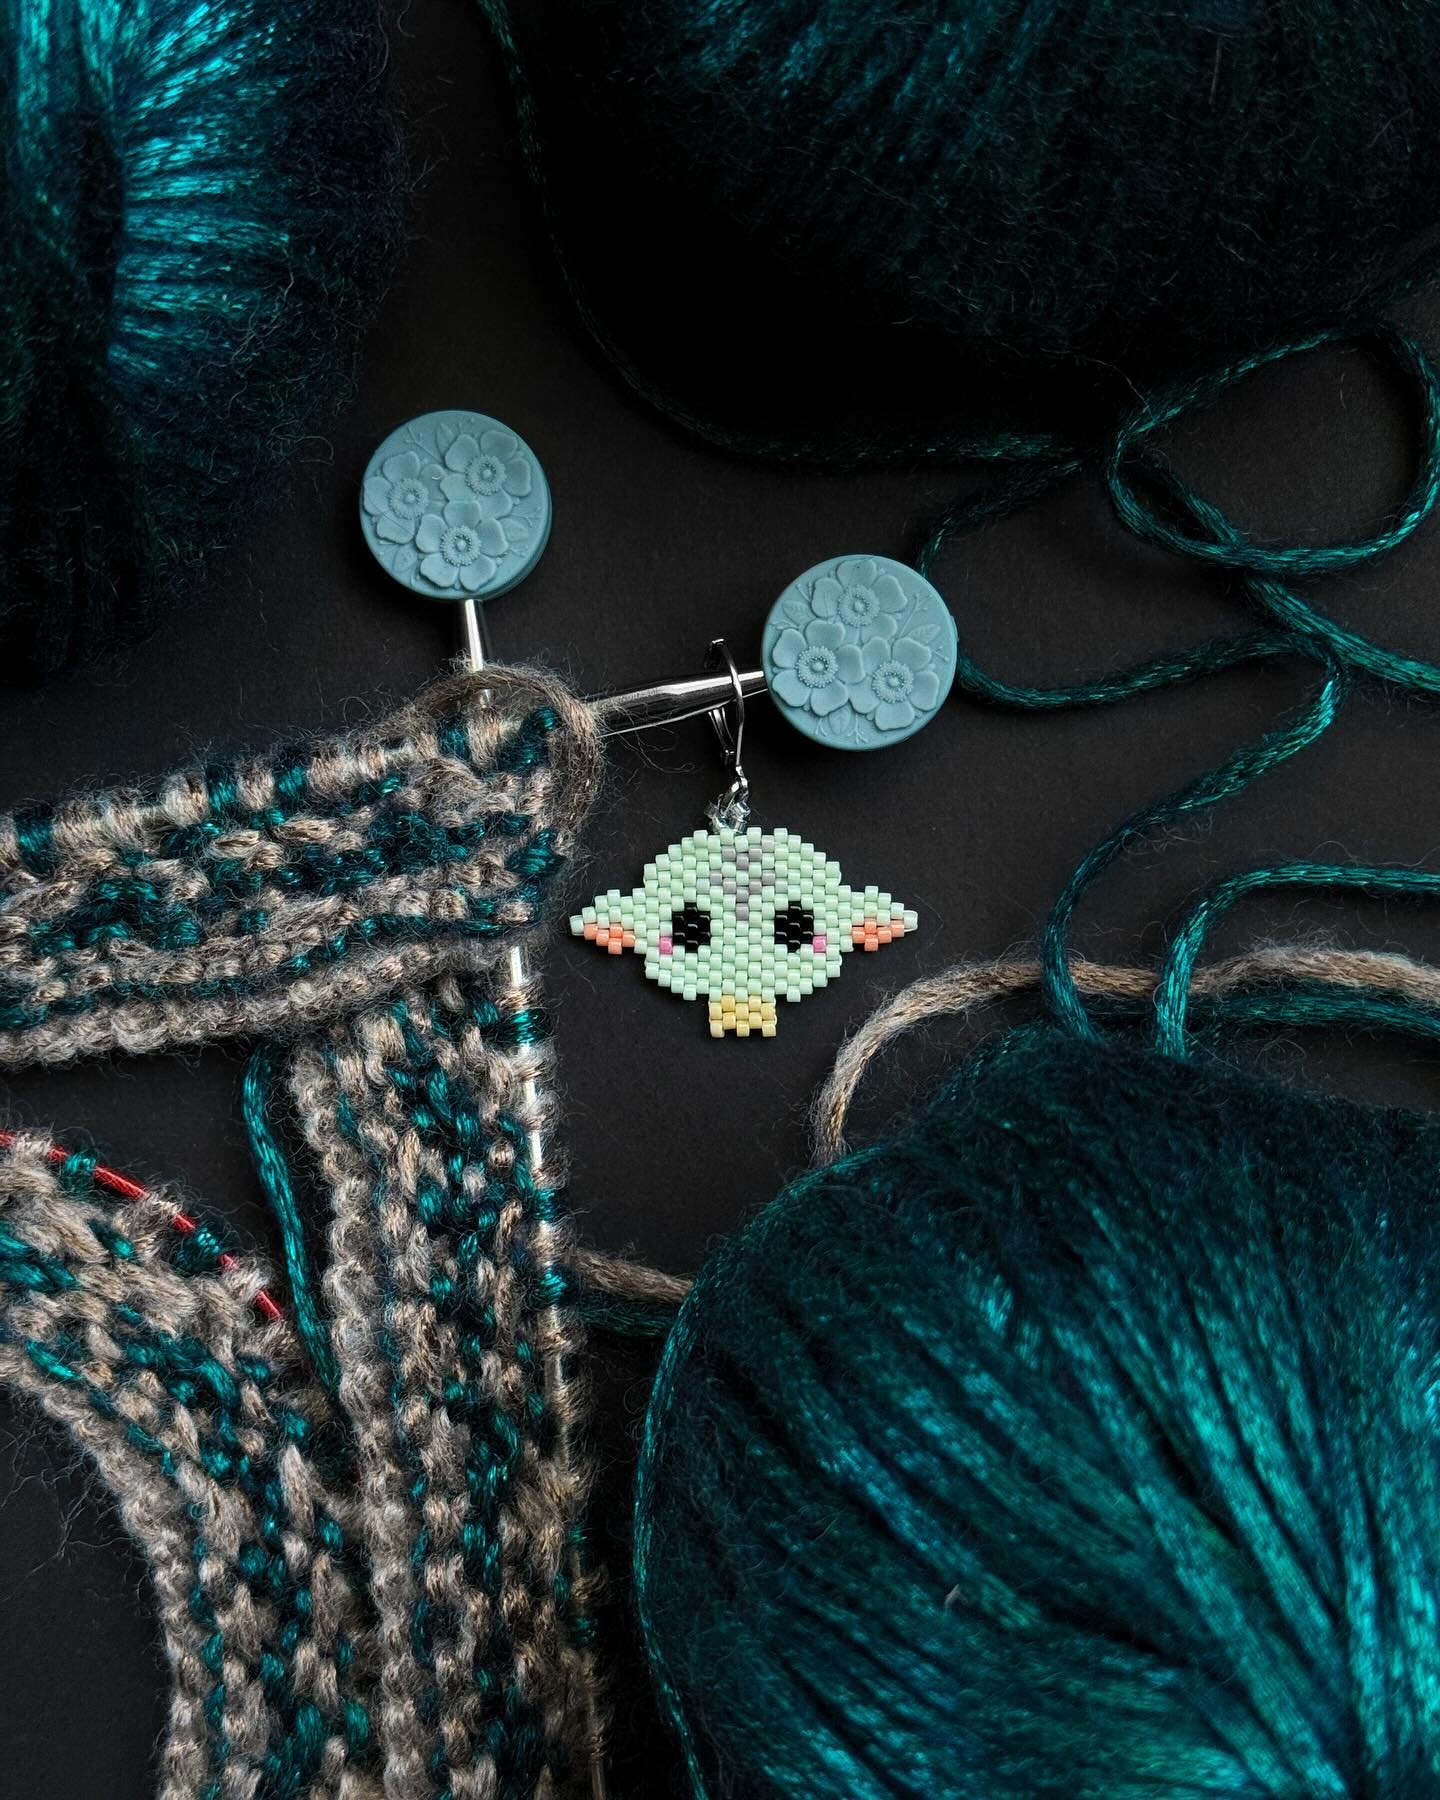 ✨MAY THE FOURTH BE WITH YOU!✨

#knitting #crochetlove #starwars #progresskeepers #stitchmarkers #knitknitknit #selfishcrochet  #yarnporn #indiedyer